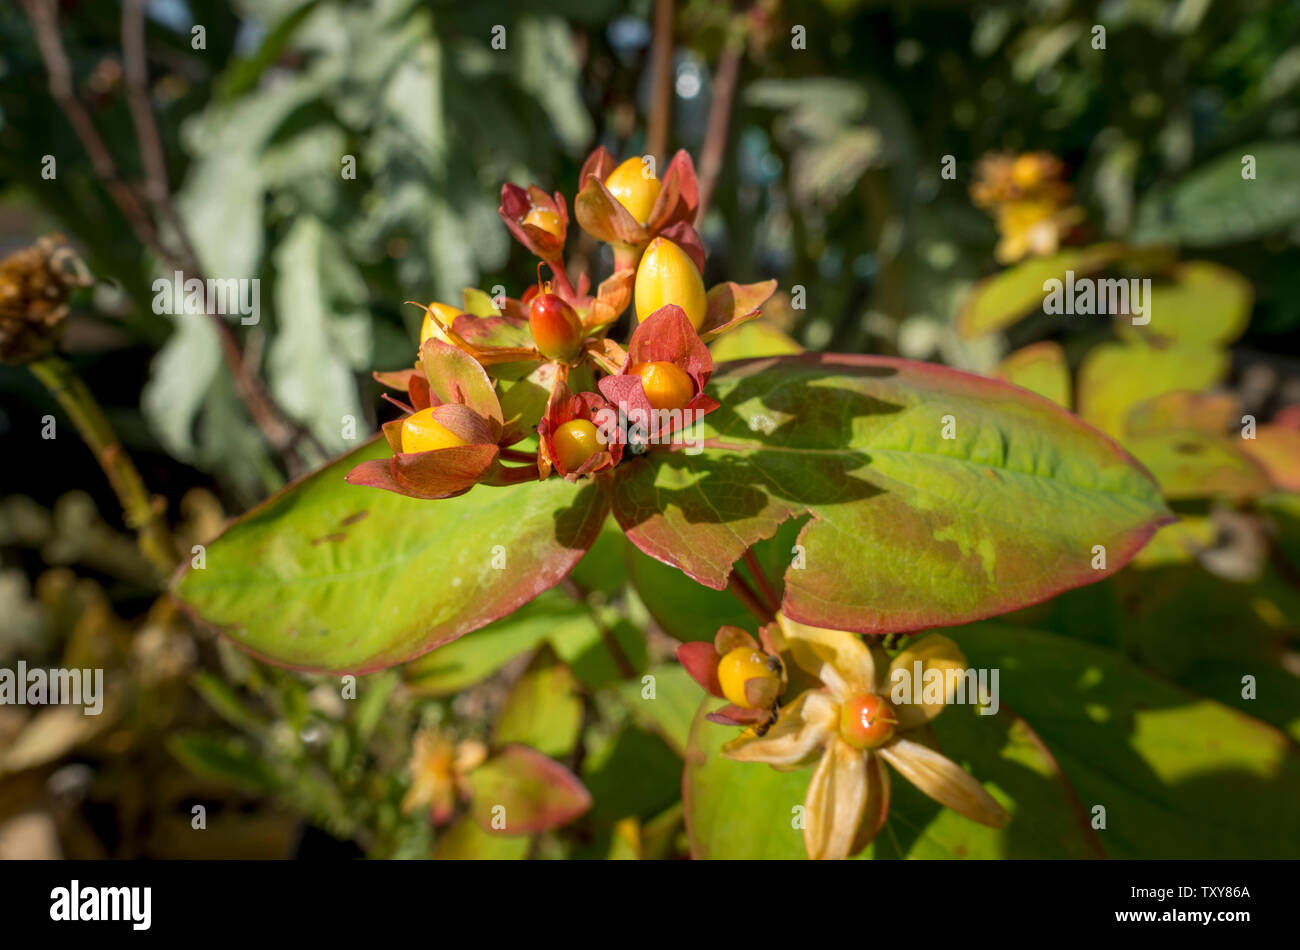 St Johns Wort plant and flowers with early berries forming Stock Photo